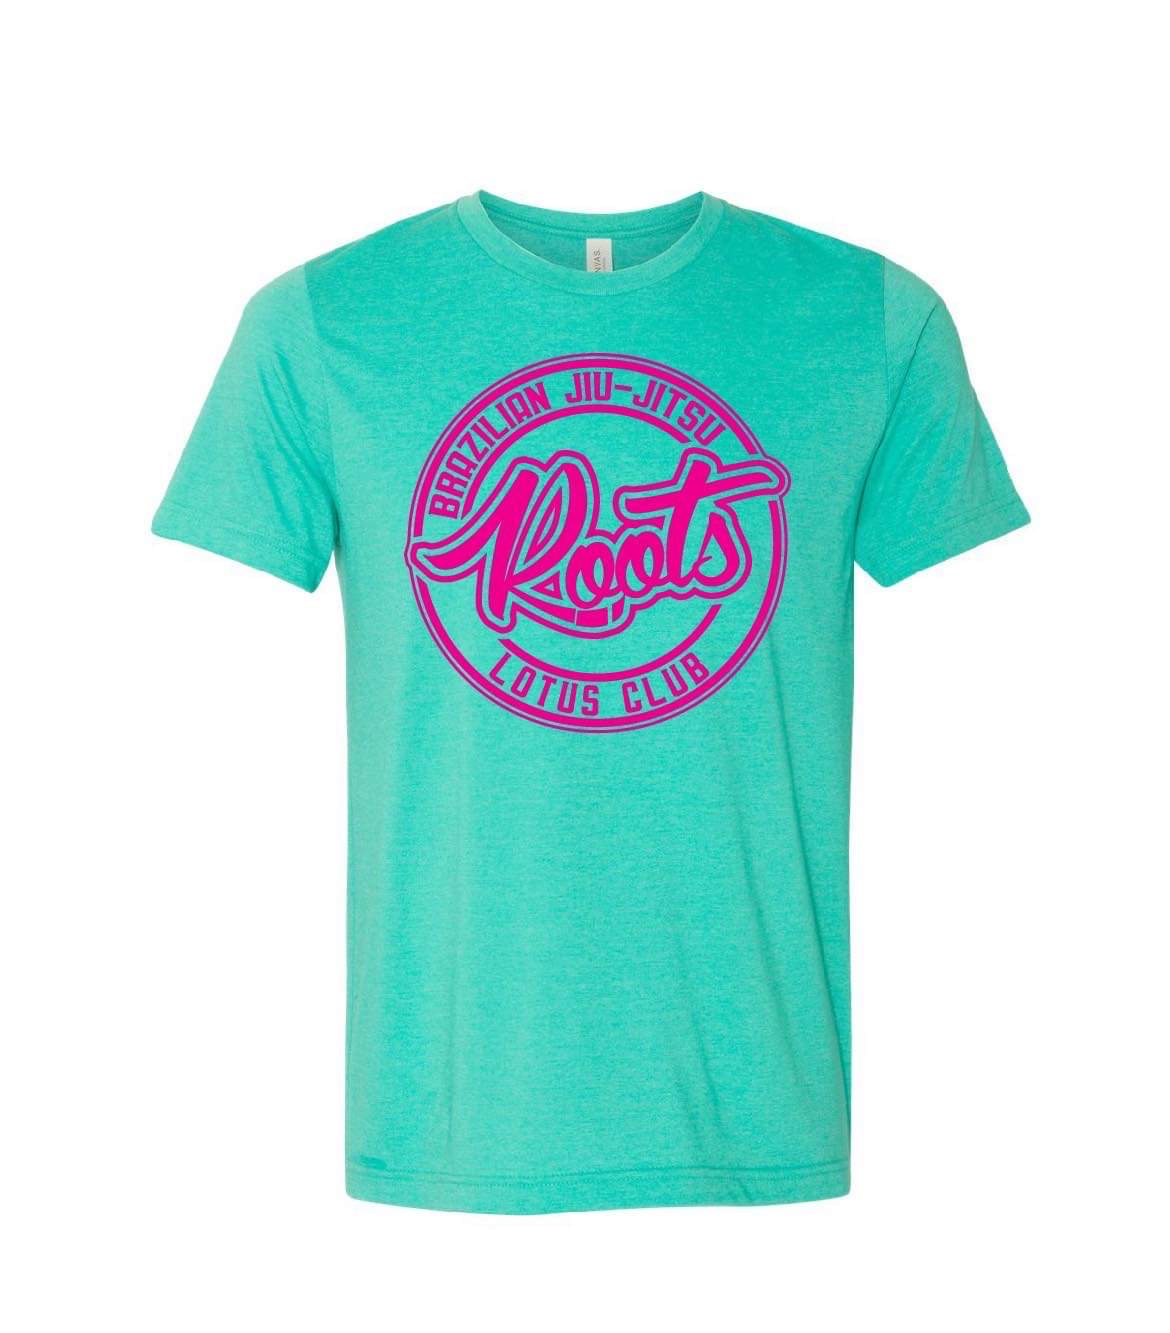 Roots BJJ Summer 2021 T-Shirt(Navy and Teal Versions)